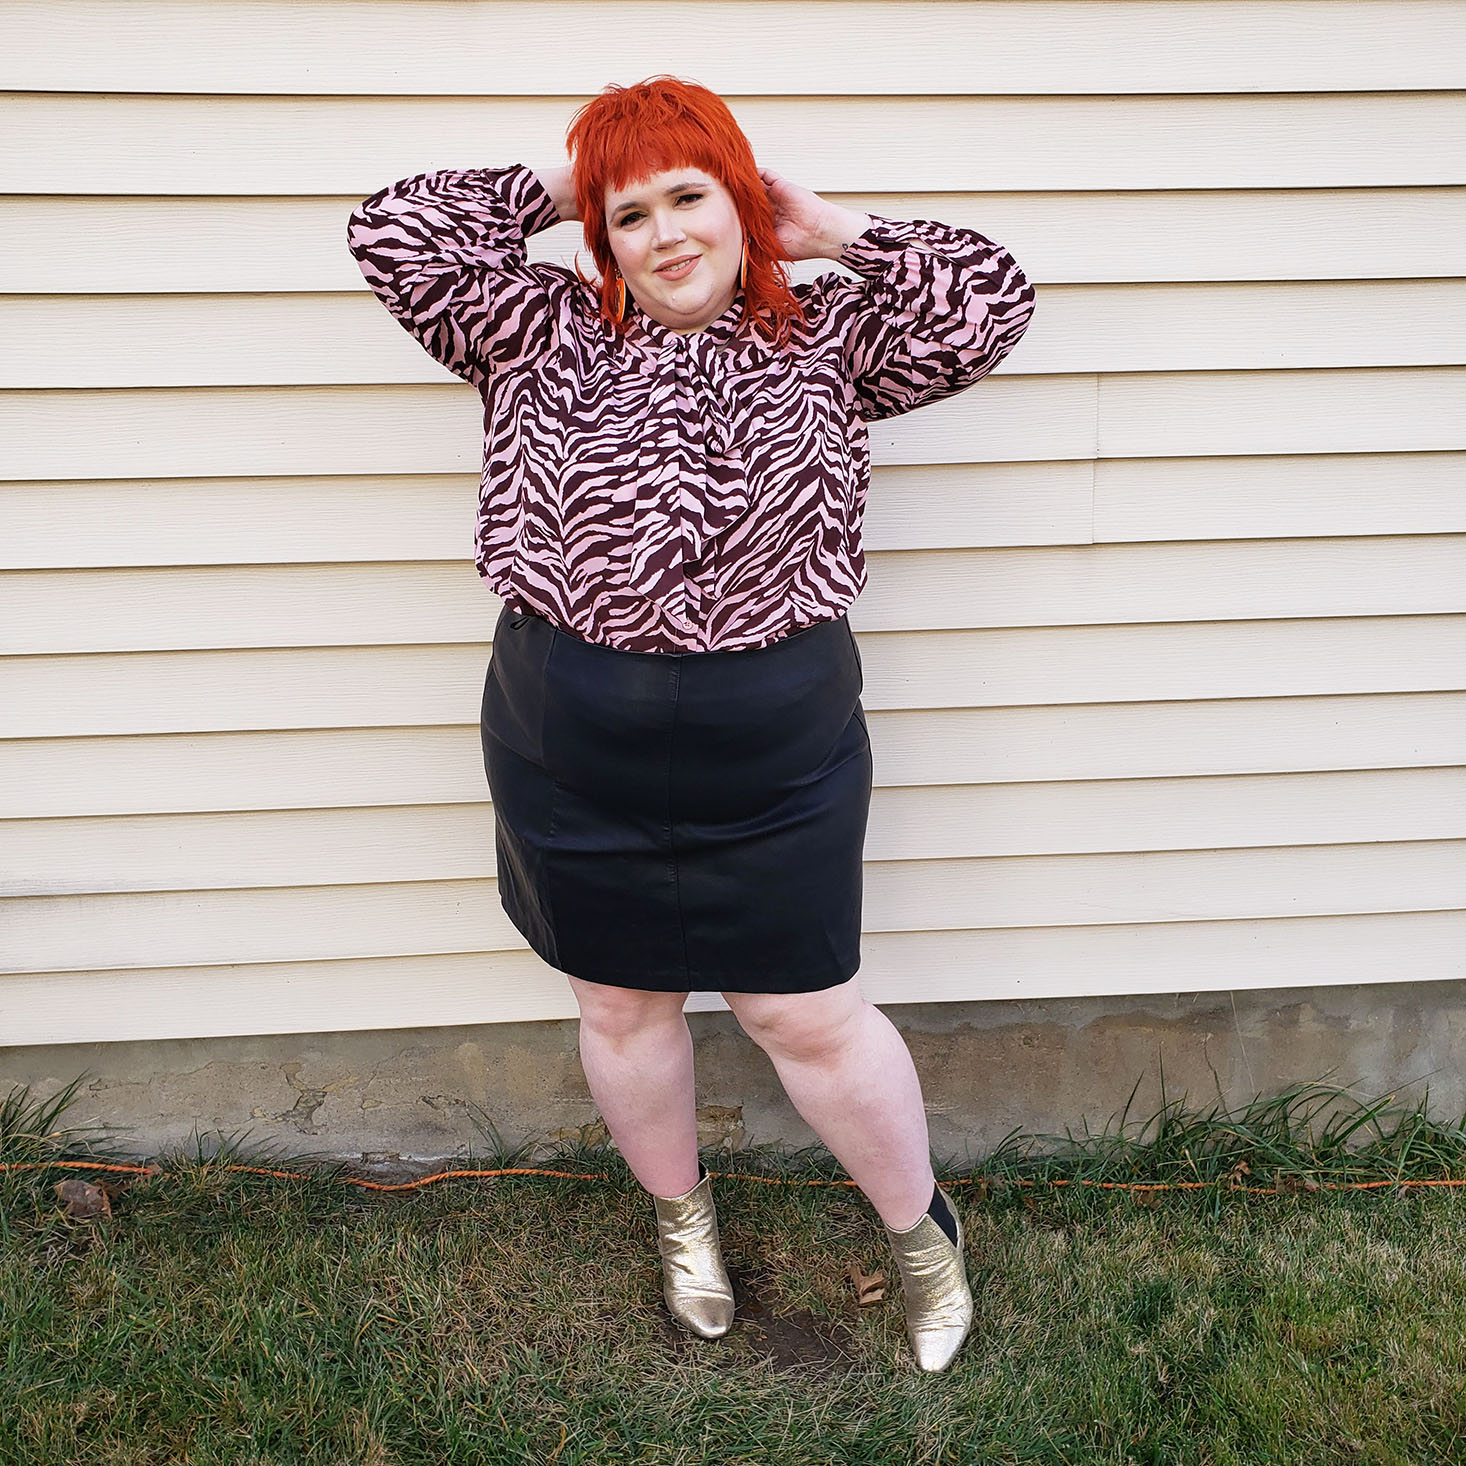 Gwynnie Bee Plus Size Fun Winter Pieces Review + Coupon